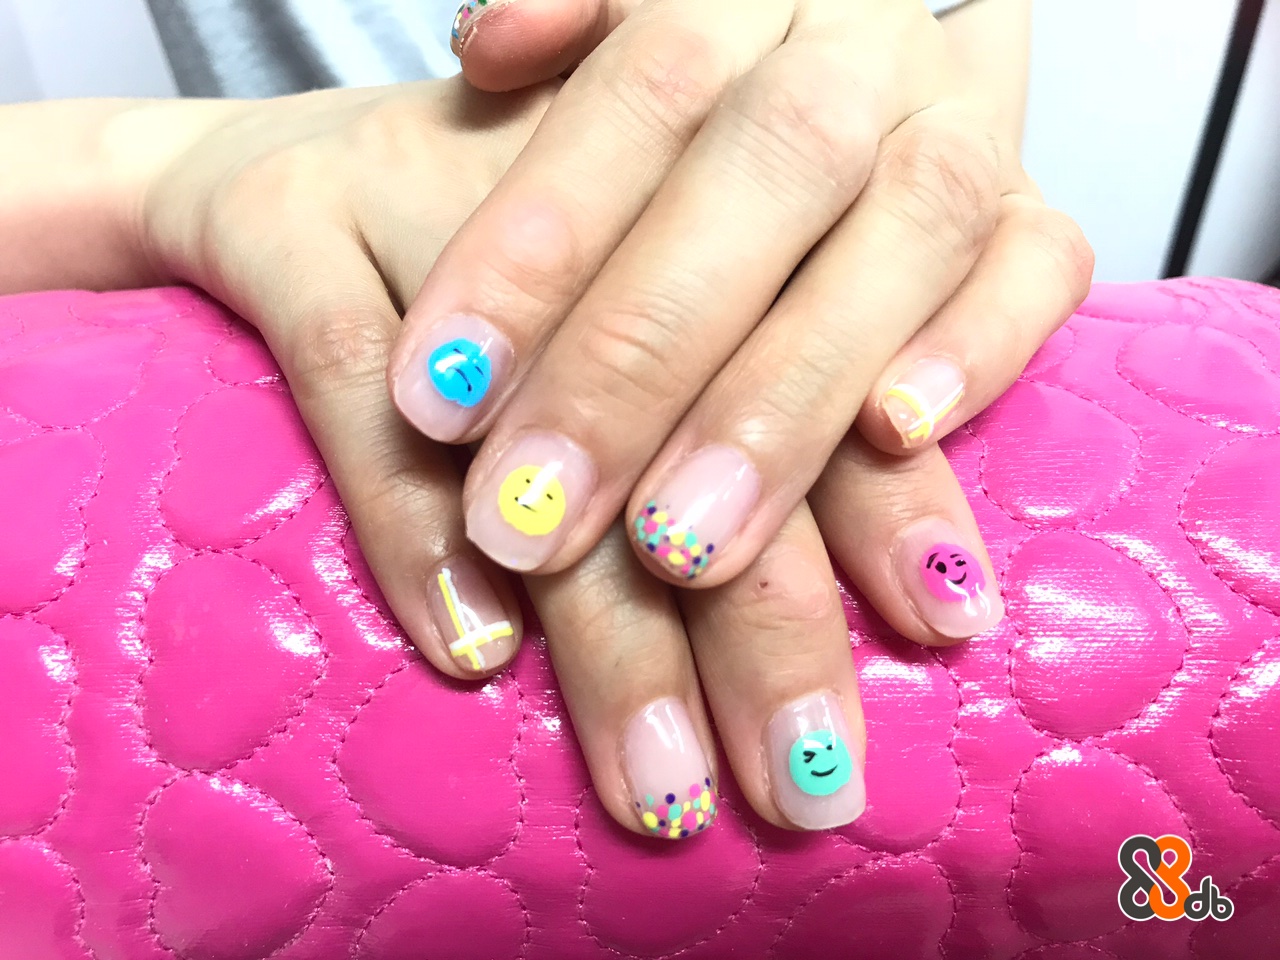  nail,finger,pink,nail care,manicure